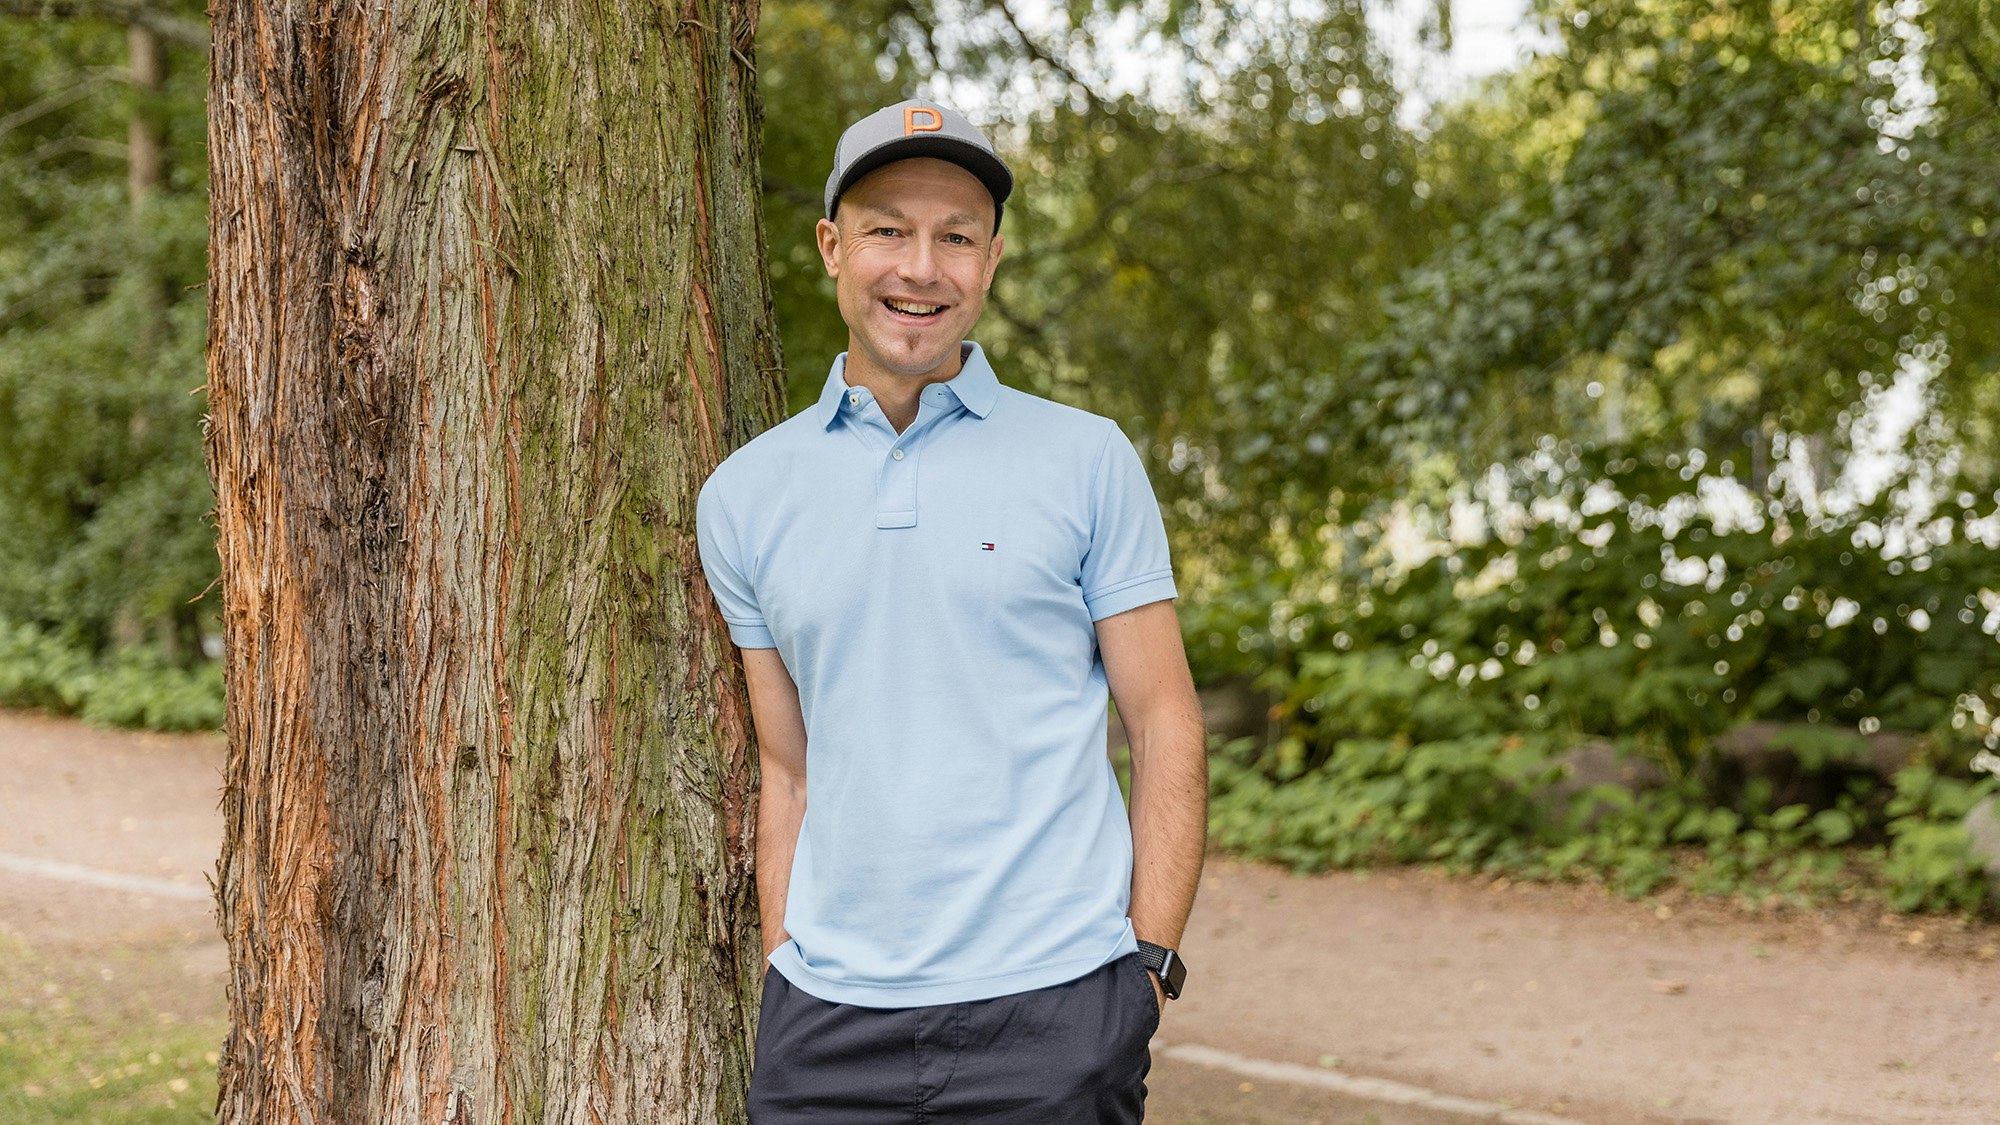 Patrick leaning against a tree, wearing a blue shirt and cap, smiling